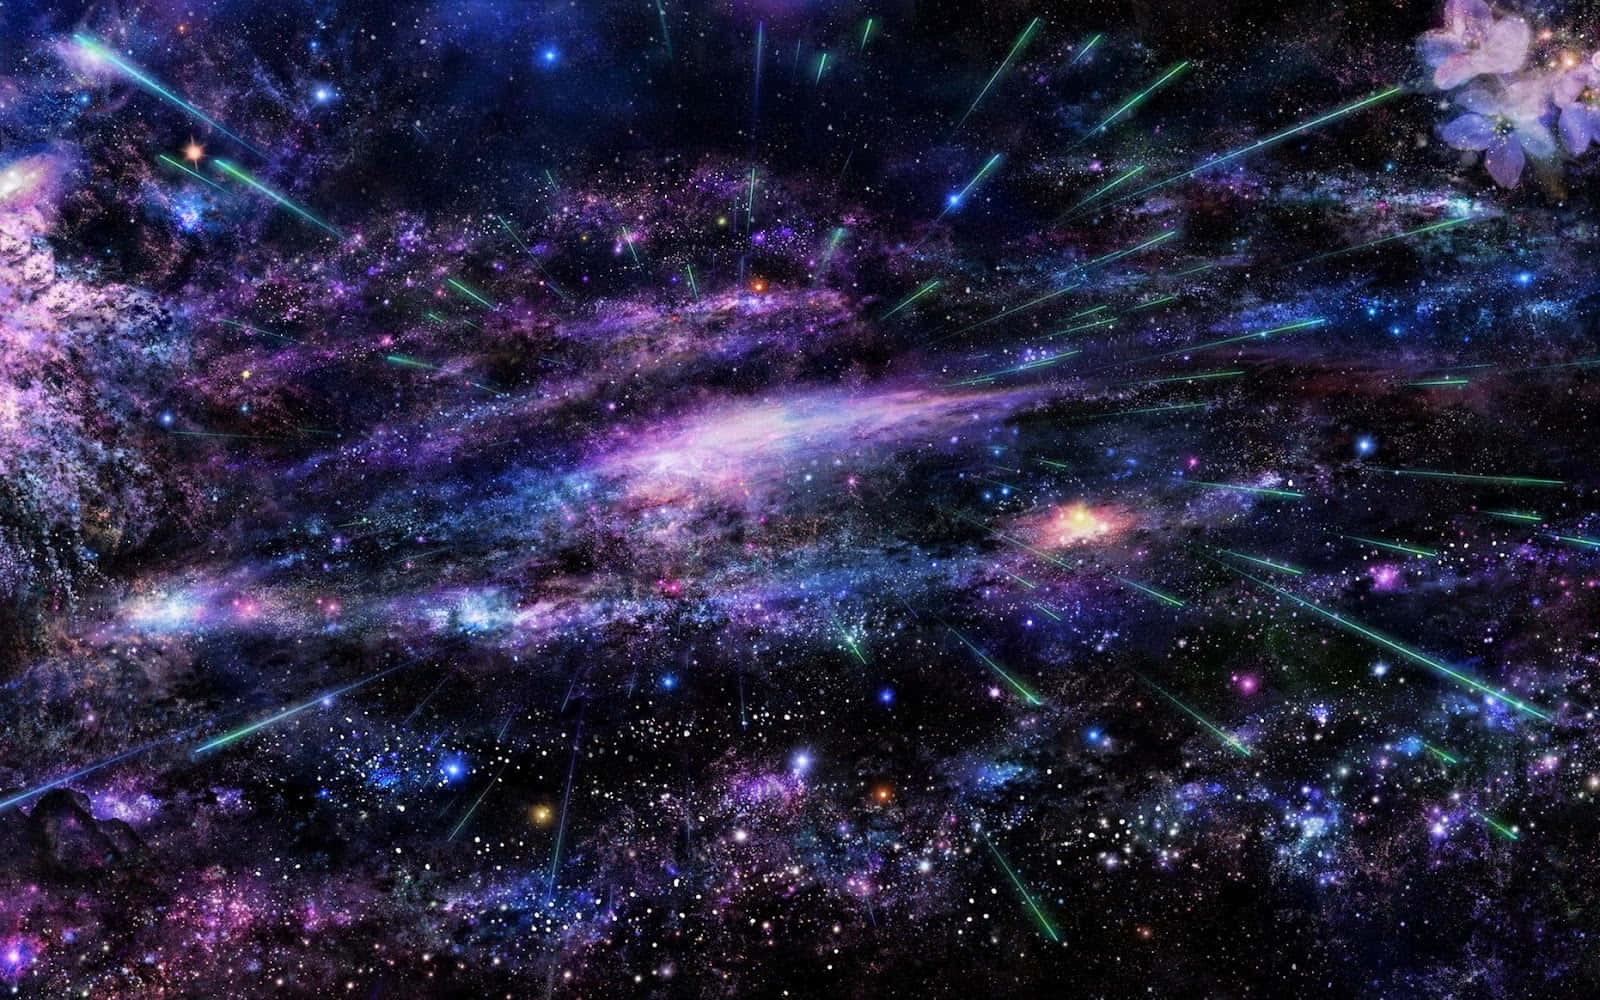 "Explore the Boundless Possibilities of The You Are Here Galaxy" Wallpaper